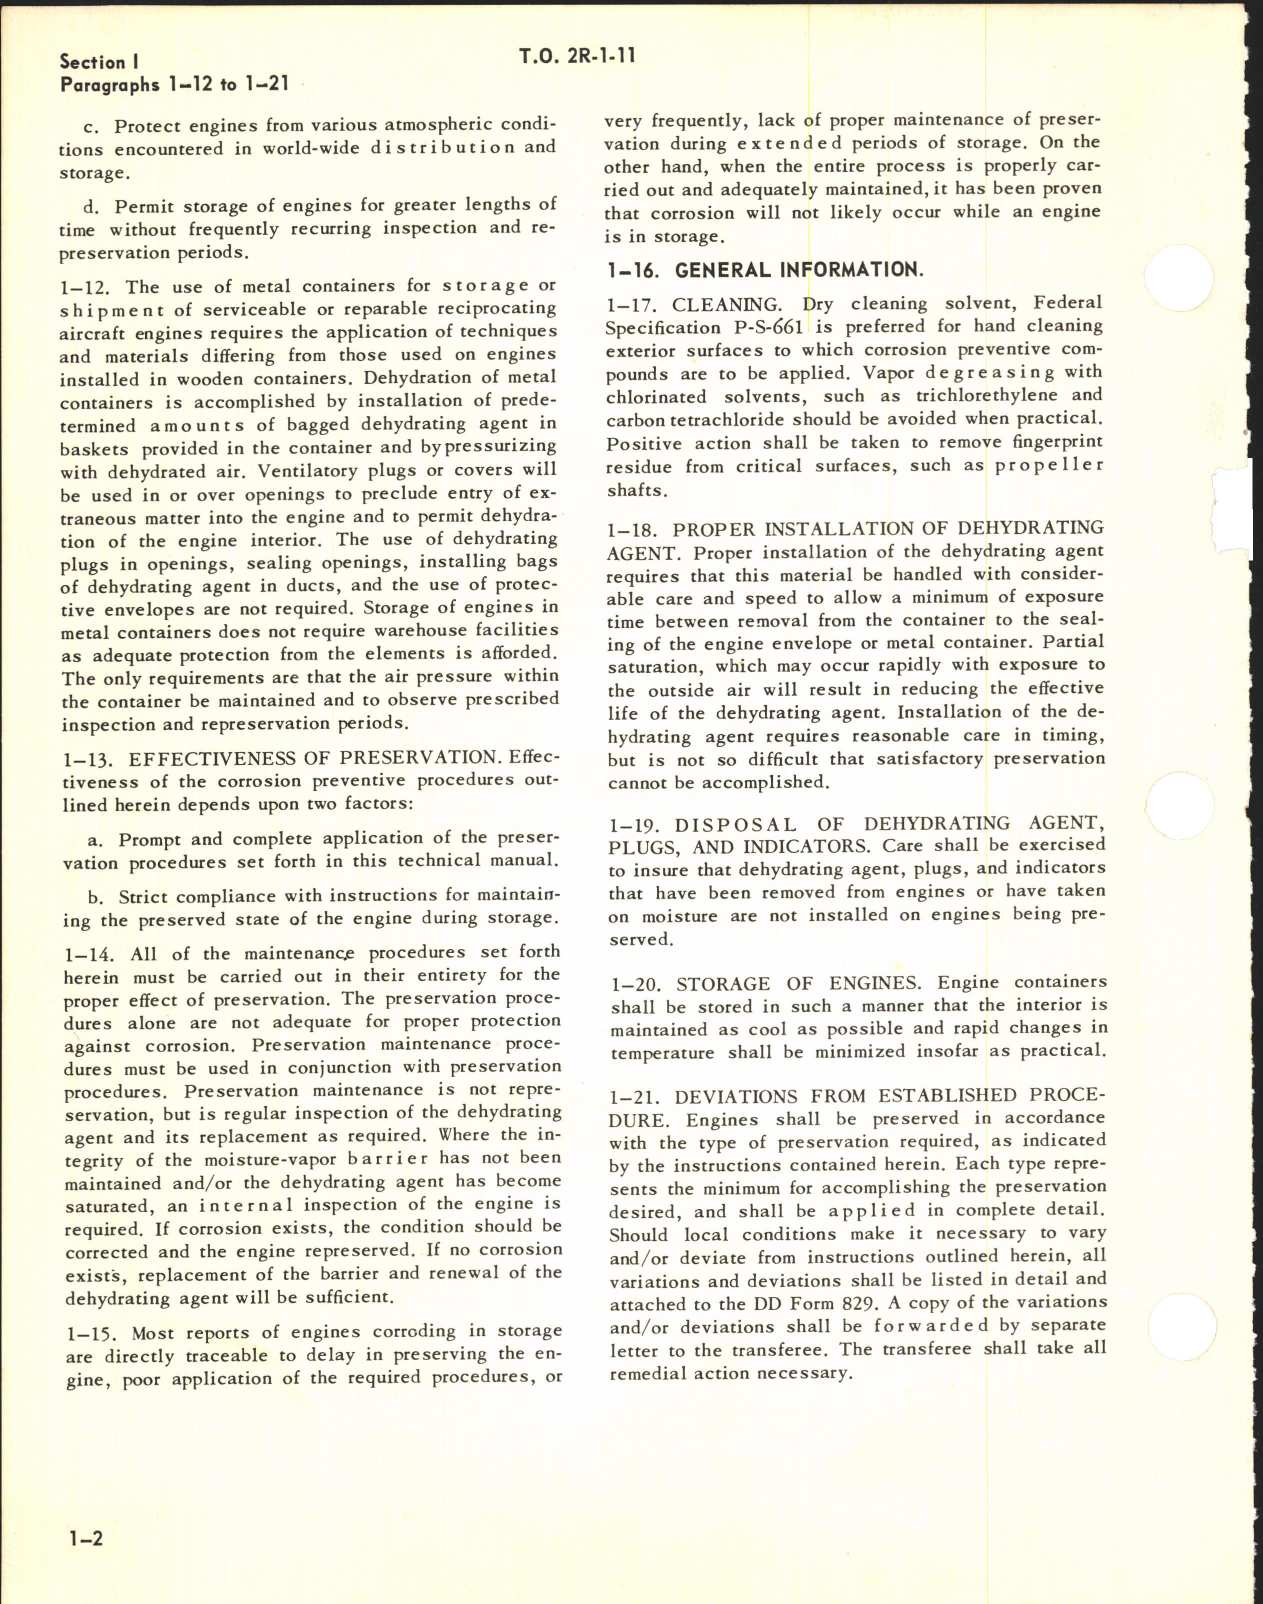 Sample page 6 from AirCorps Library document: Corrosion Control of Reciprocating Aircraft Engines